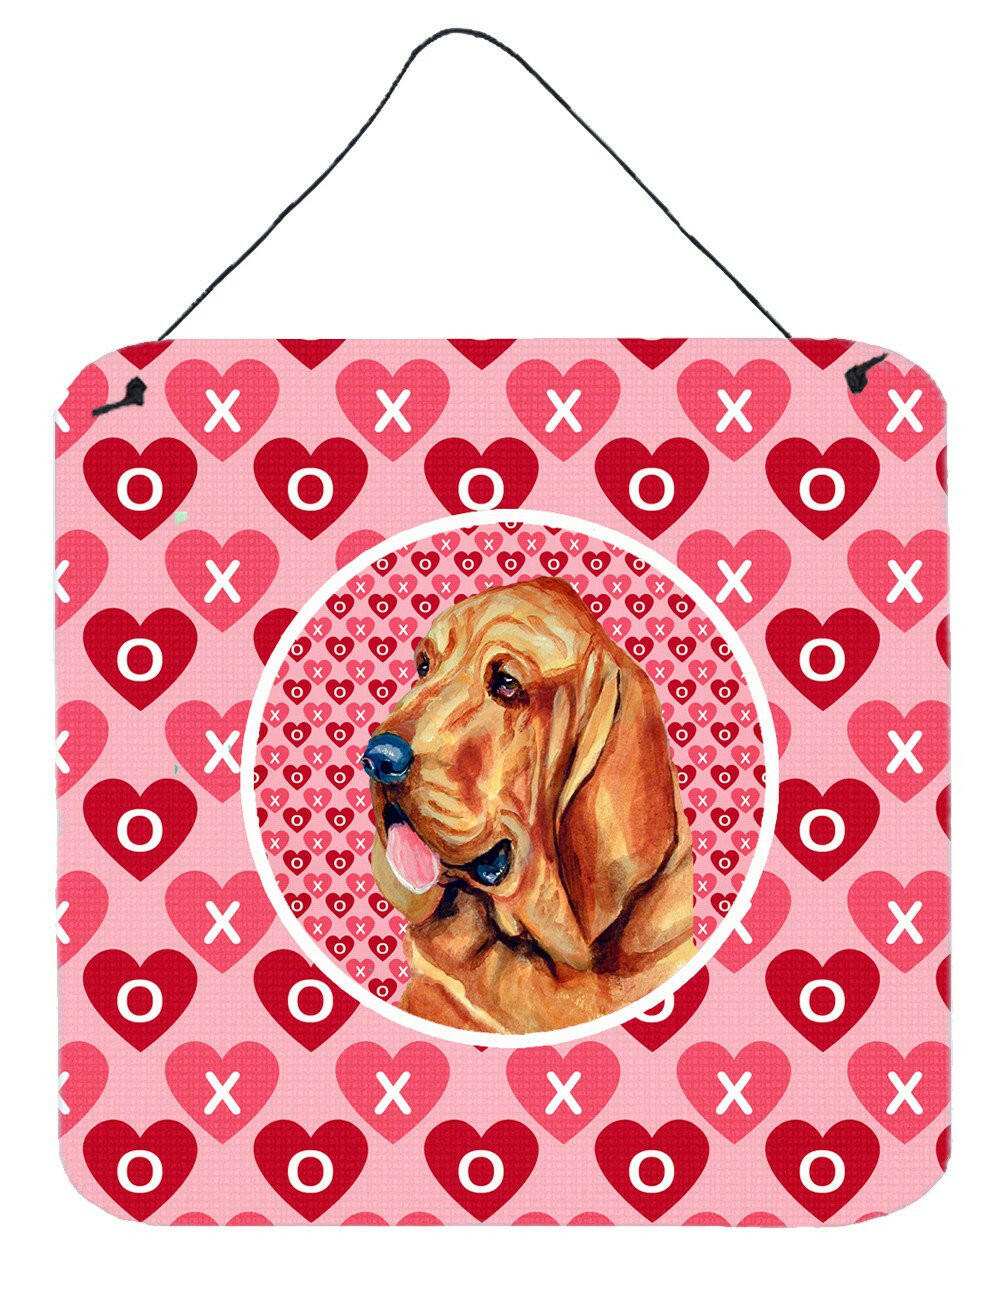 Bloodhound Valentine's Love and Hearts Wall or Door Hanging Prints by Caroline's Treasures